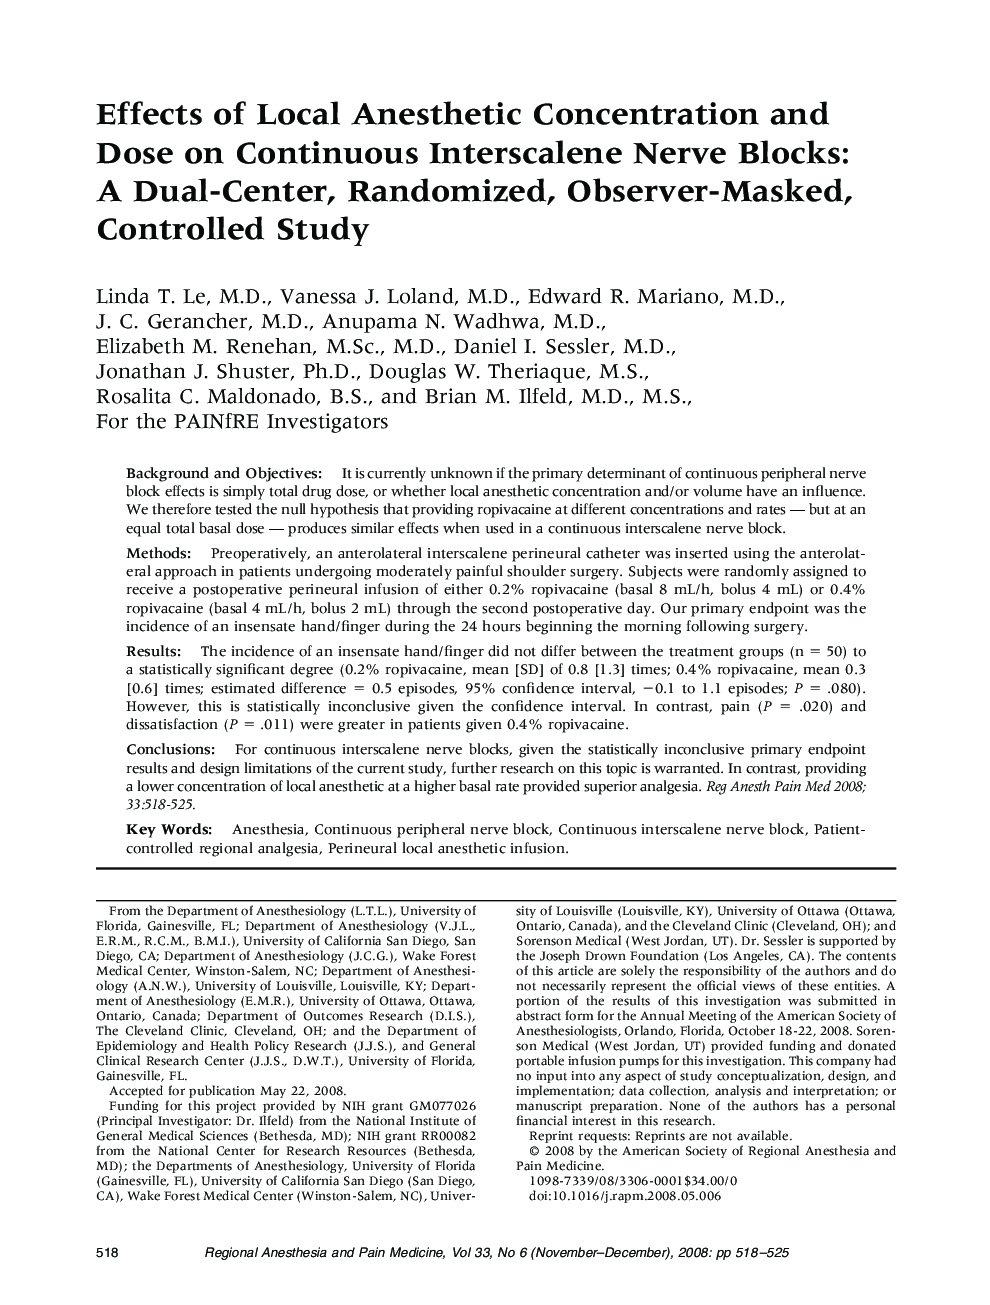 Effects of Local Anesthetic Concentration and Dose on Continuous Interscalene Nerve Blocks: A Dual-Center, Randomized, Observer-Masked, Controlled Study